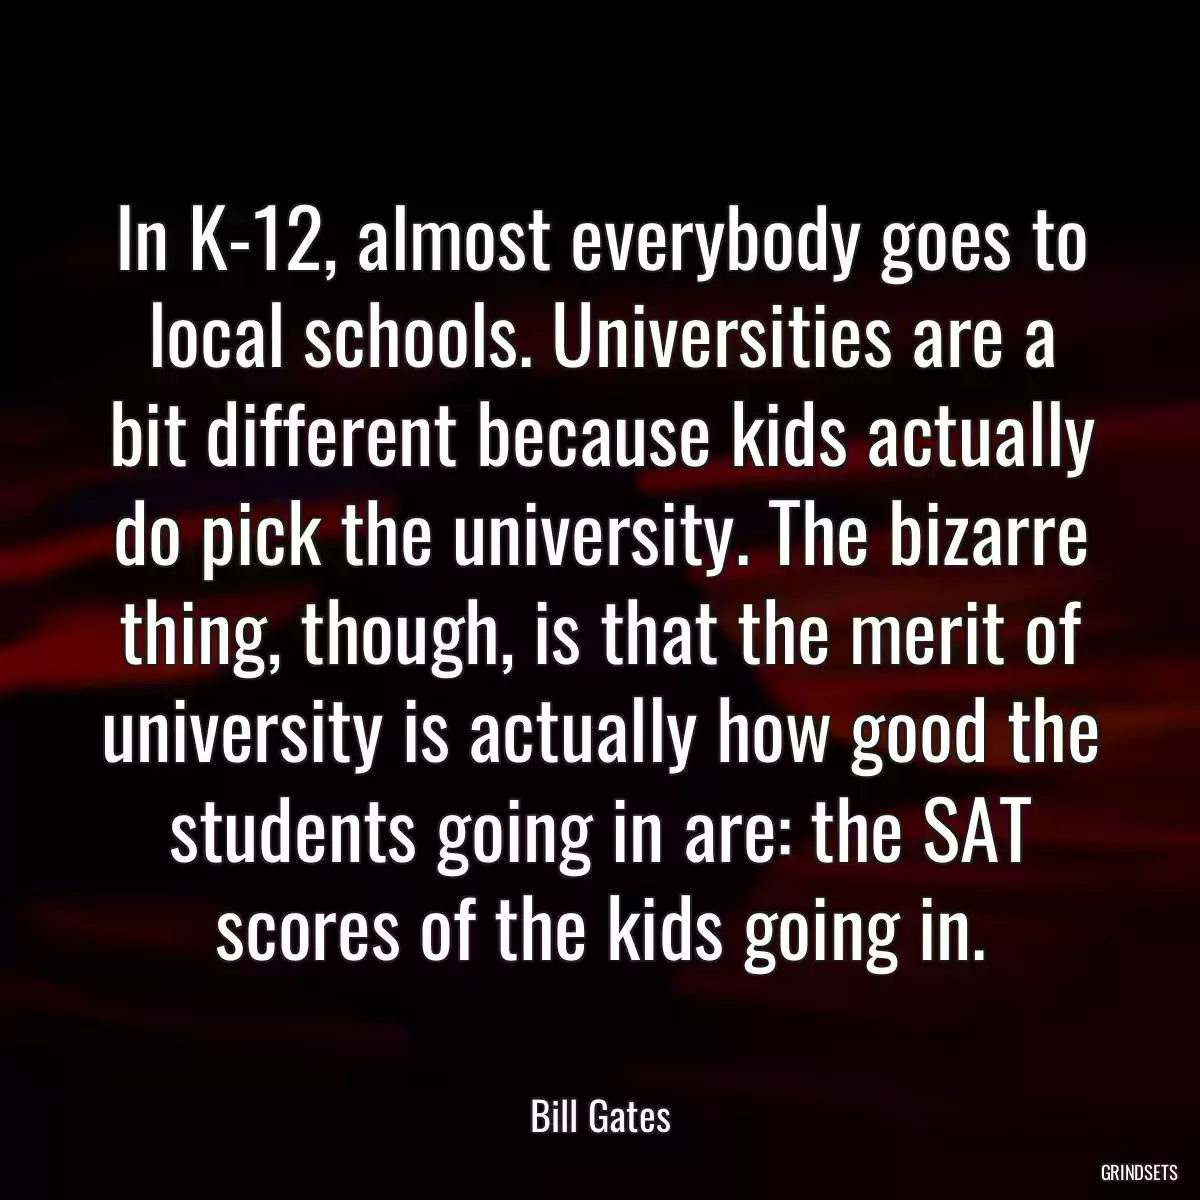 In K-12, almost everybody goes to local schools. Universities are a bit different because kids actually do pick the university. The bizarre thing, though, is that the merit of university is actually how good the students going in are: the SAT scores of the kids going in.